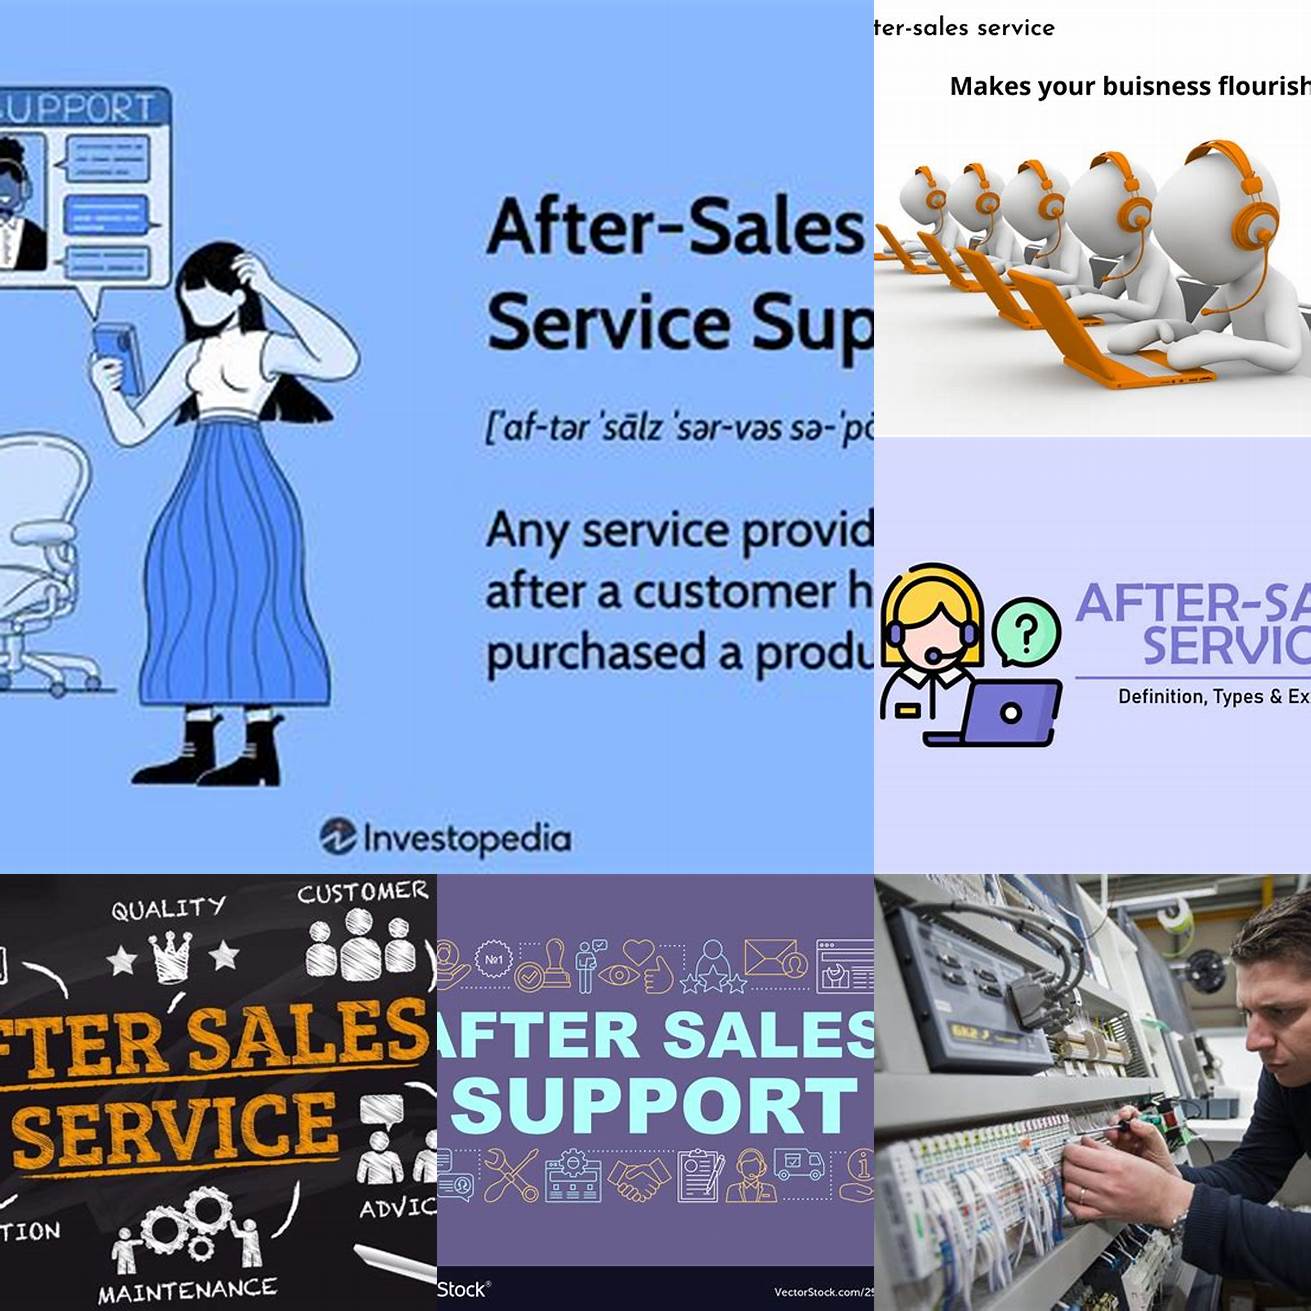 After-Sales Service and Support